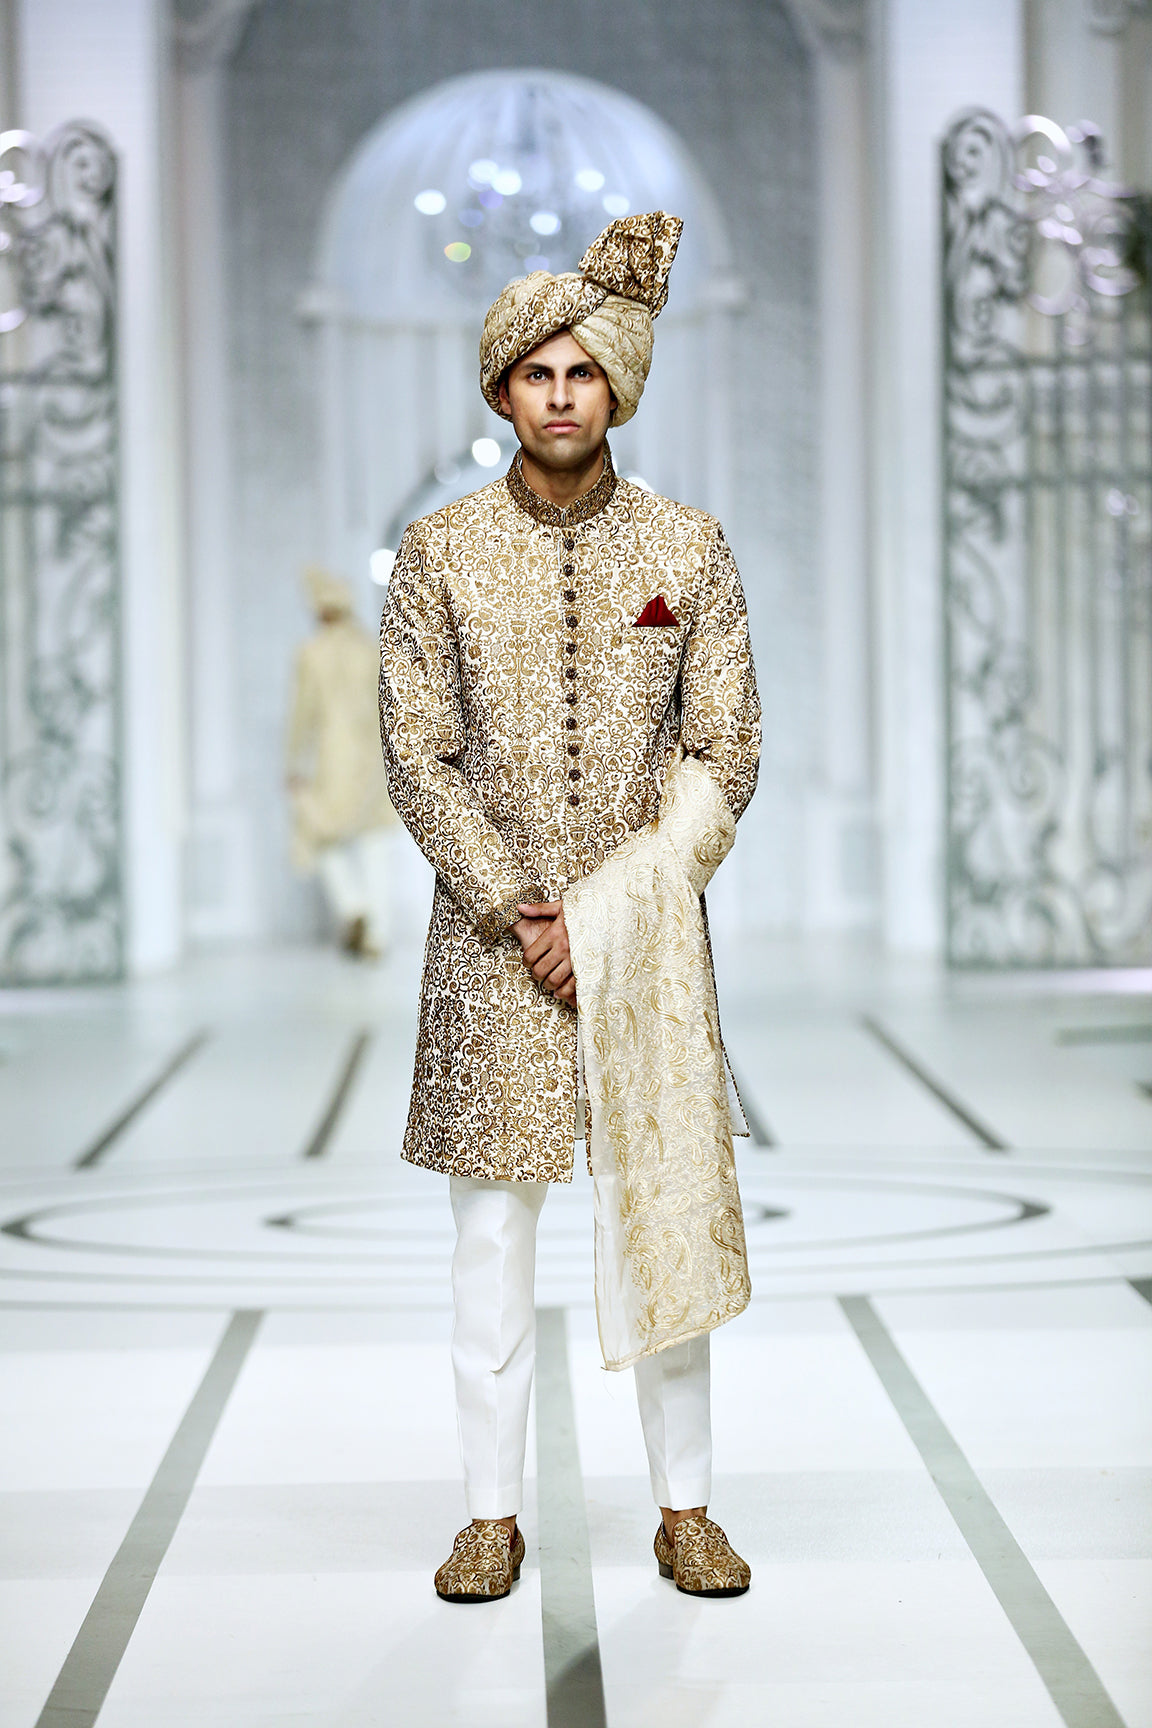 Copper Sherwani by BCW 32 - Intricately Designed Traditional Attire